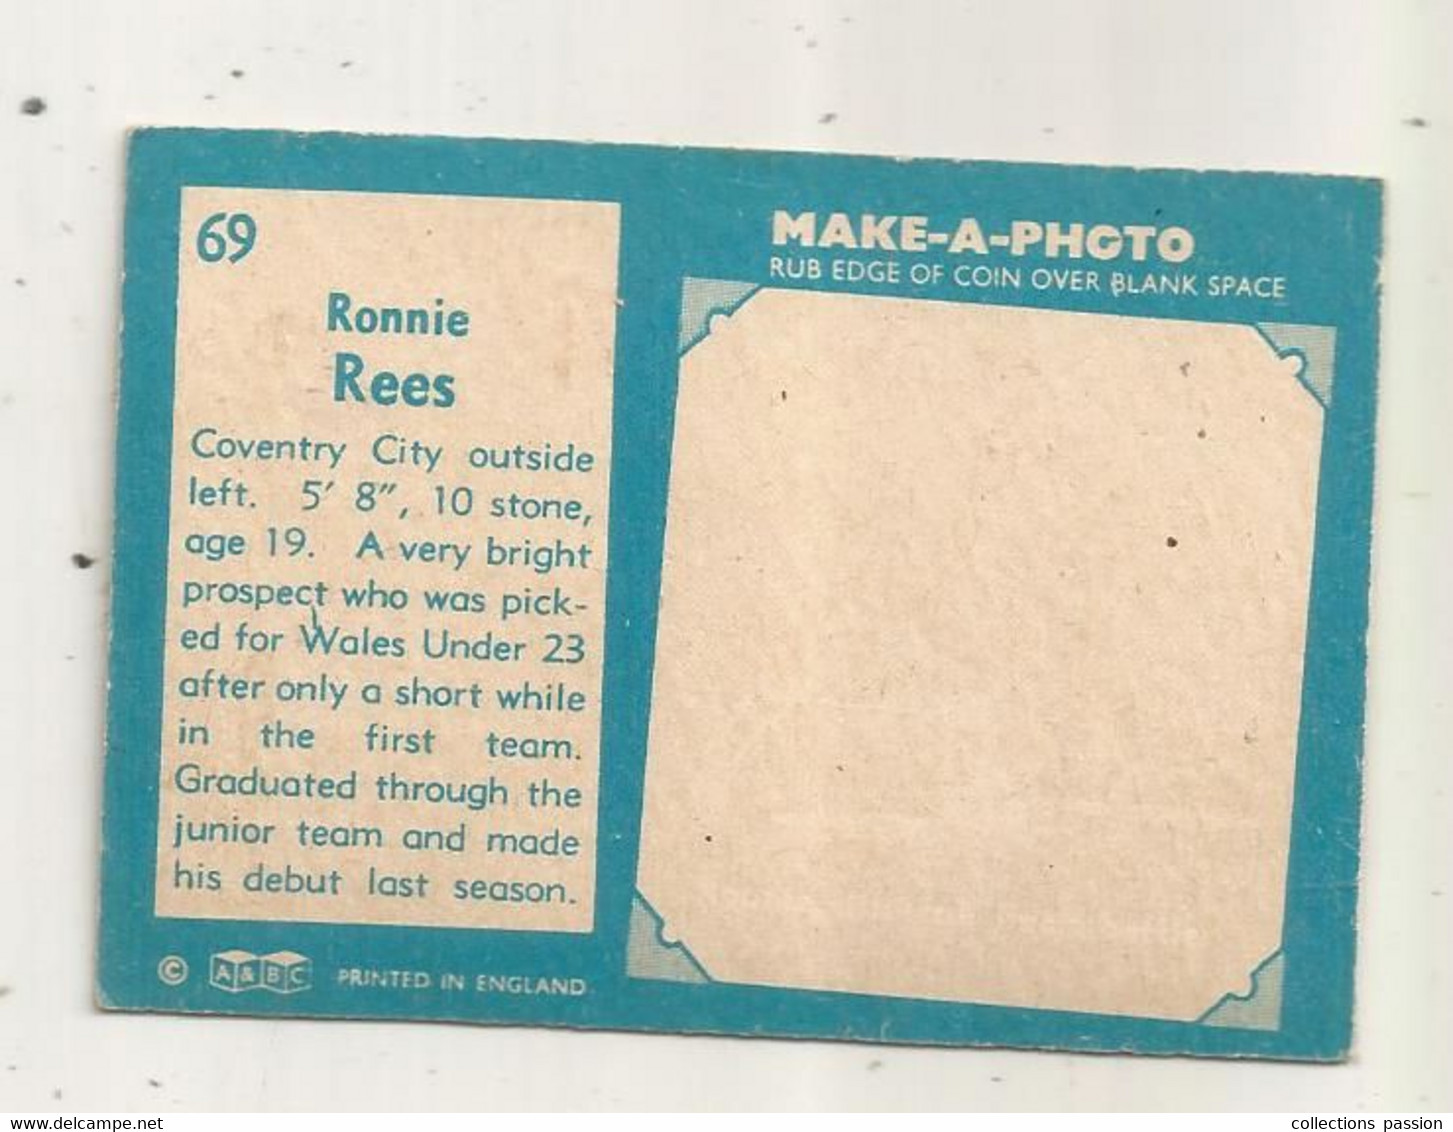 Trading Card , A&BC , England, Chewing Gum, Serie: Make A Photo , Année 60 , N° 69, RONNIE REES,  Coventry City - Trading-Karten